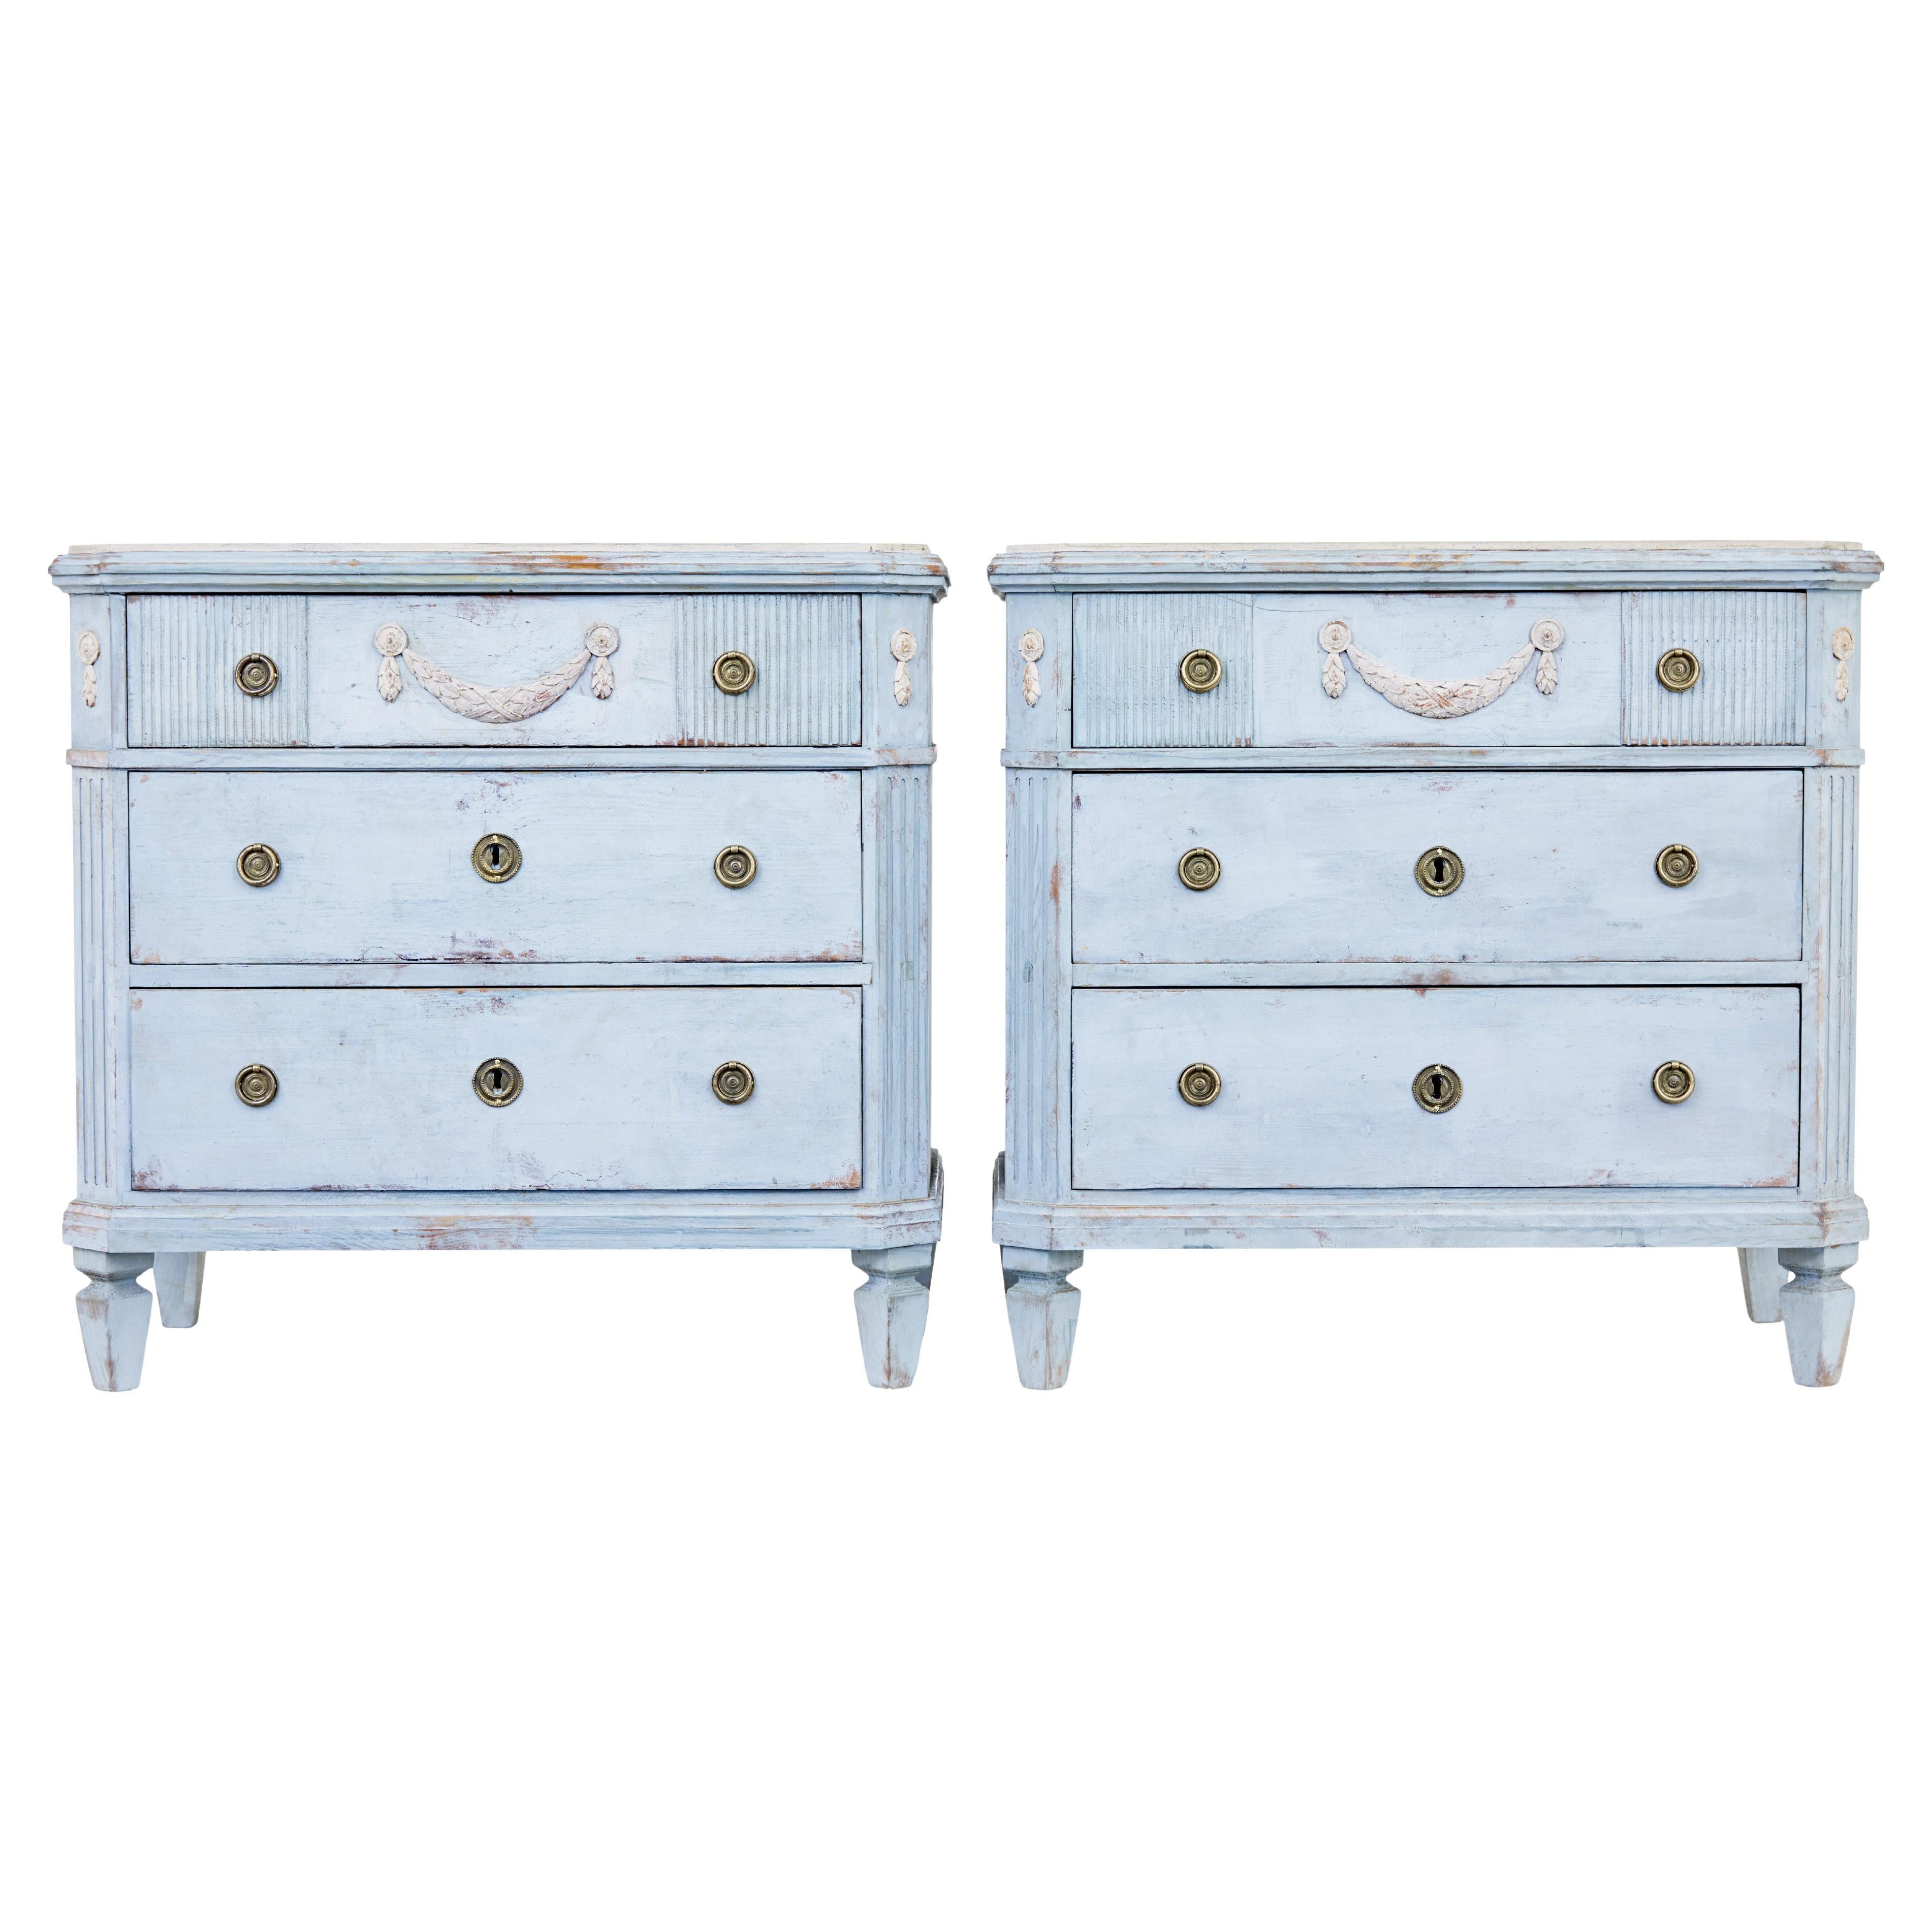 Pair of 19th century carved Swedish painted chest of drawers For Sale